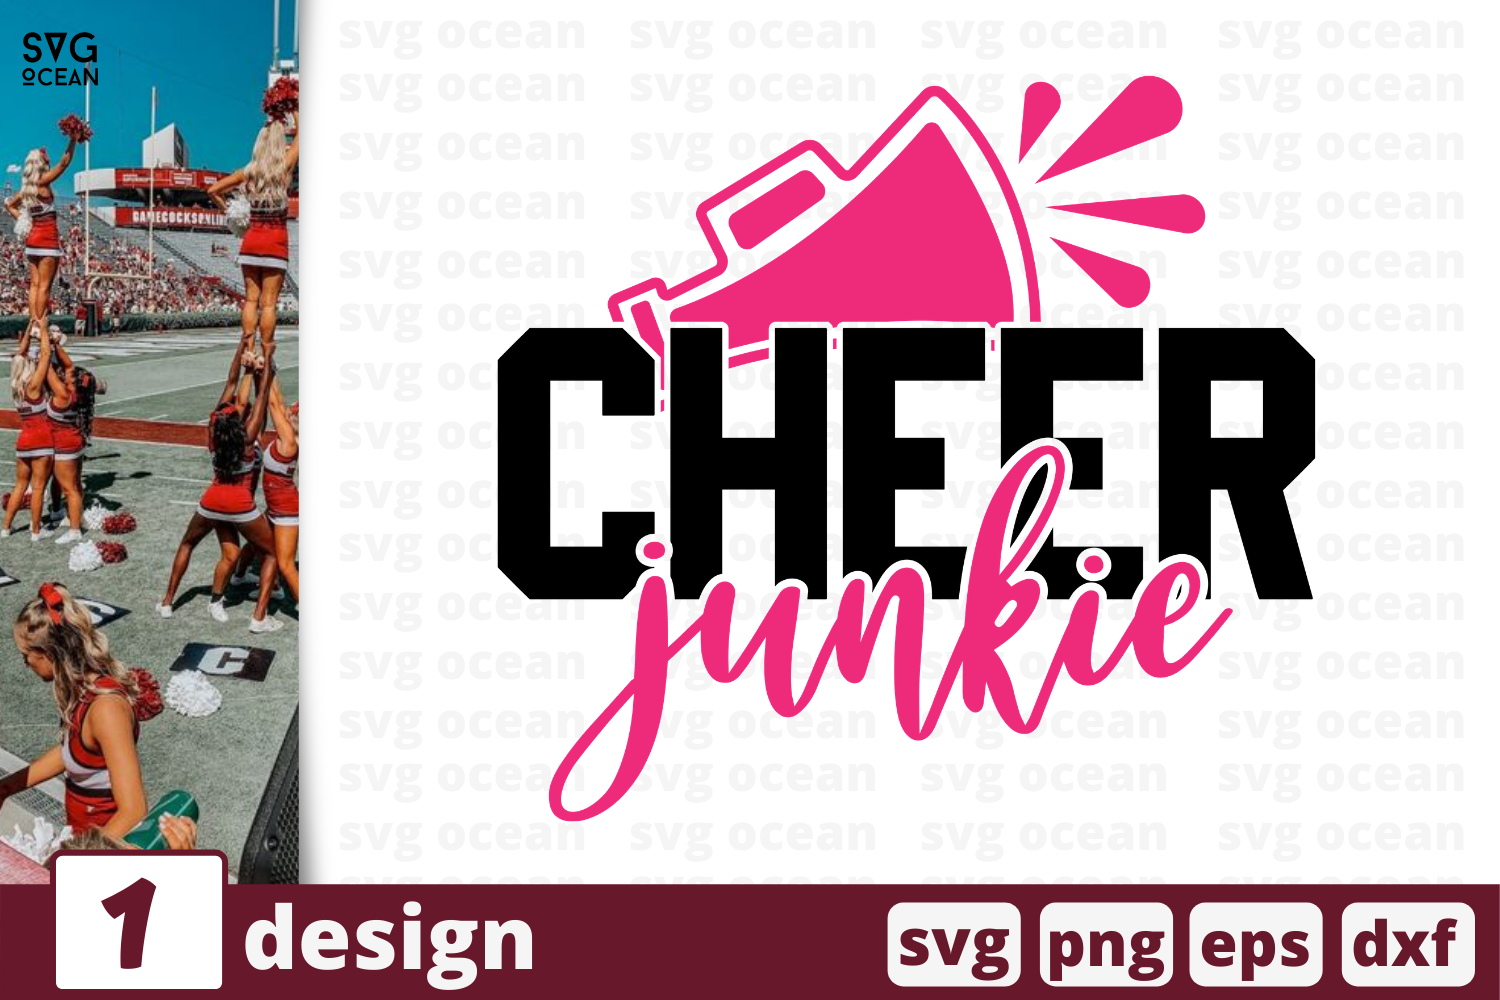 1 Cheer Junkie Cheer Quote Cricut Svg By Svgocean Thehungryjpeg Com